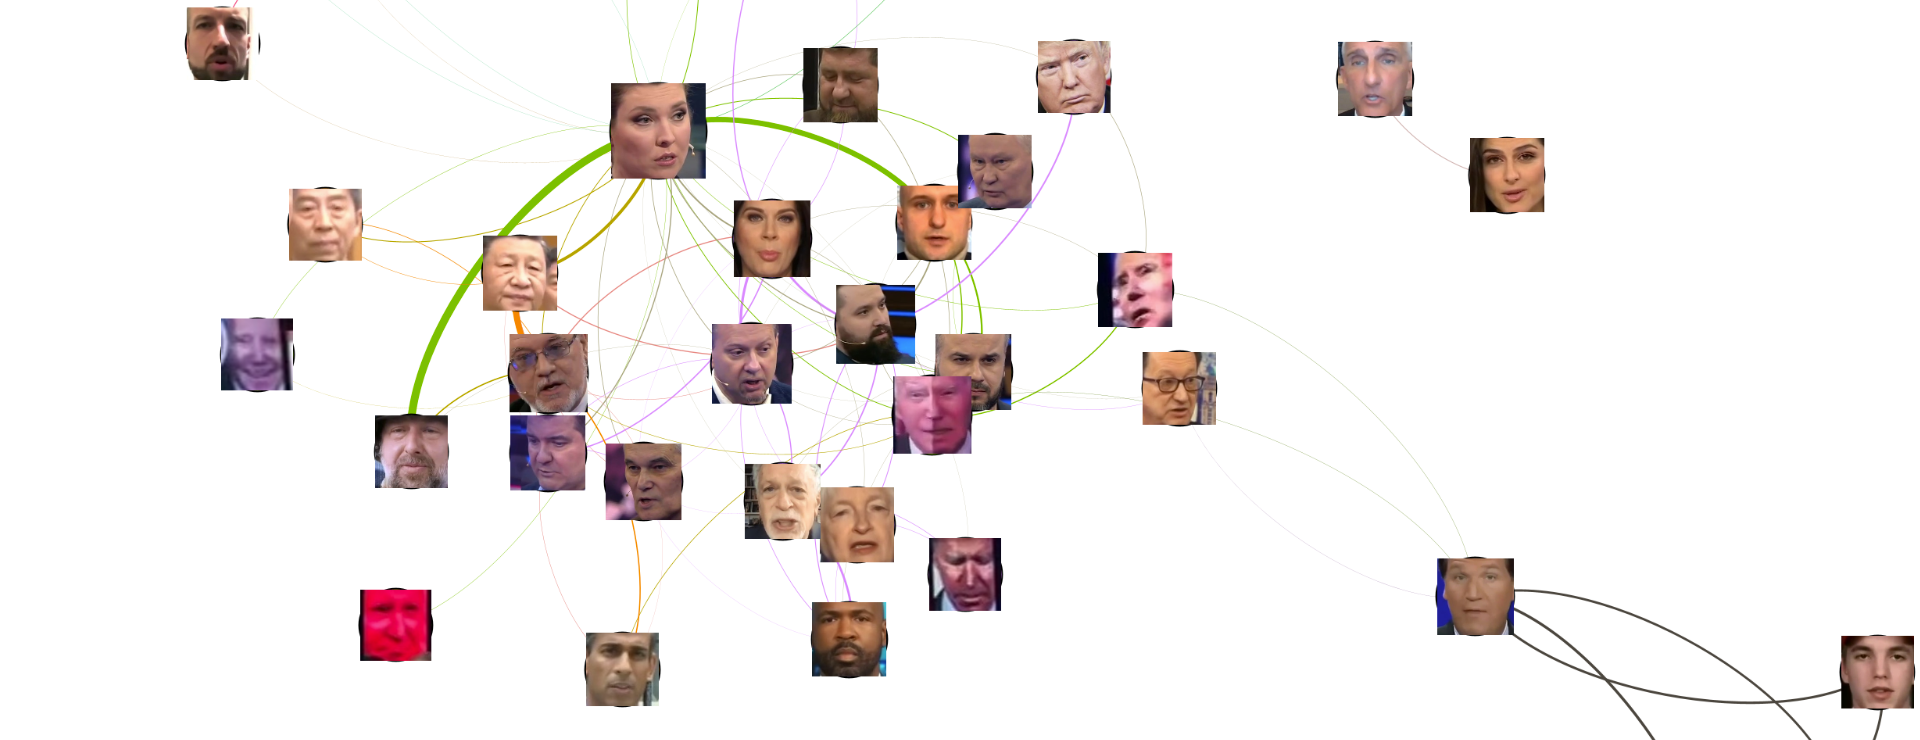 Visual Explorer: Searching Russian TV News With The At-Scale Face Detection & Embedding RESTful API